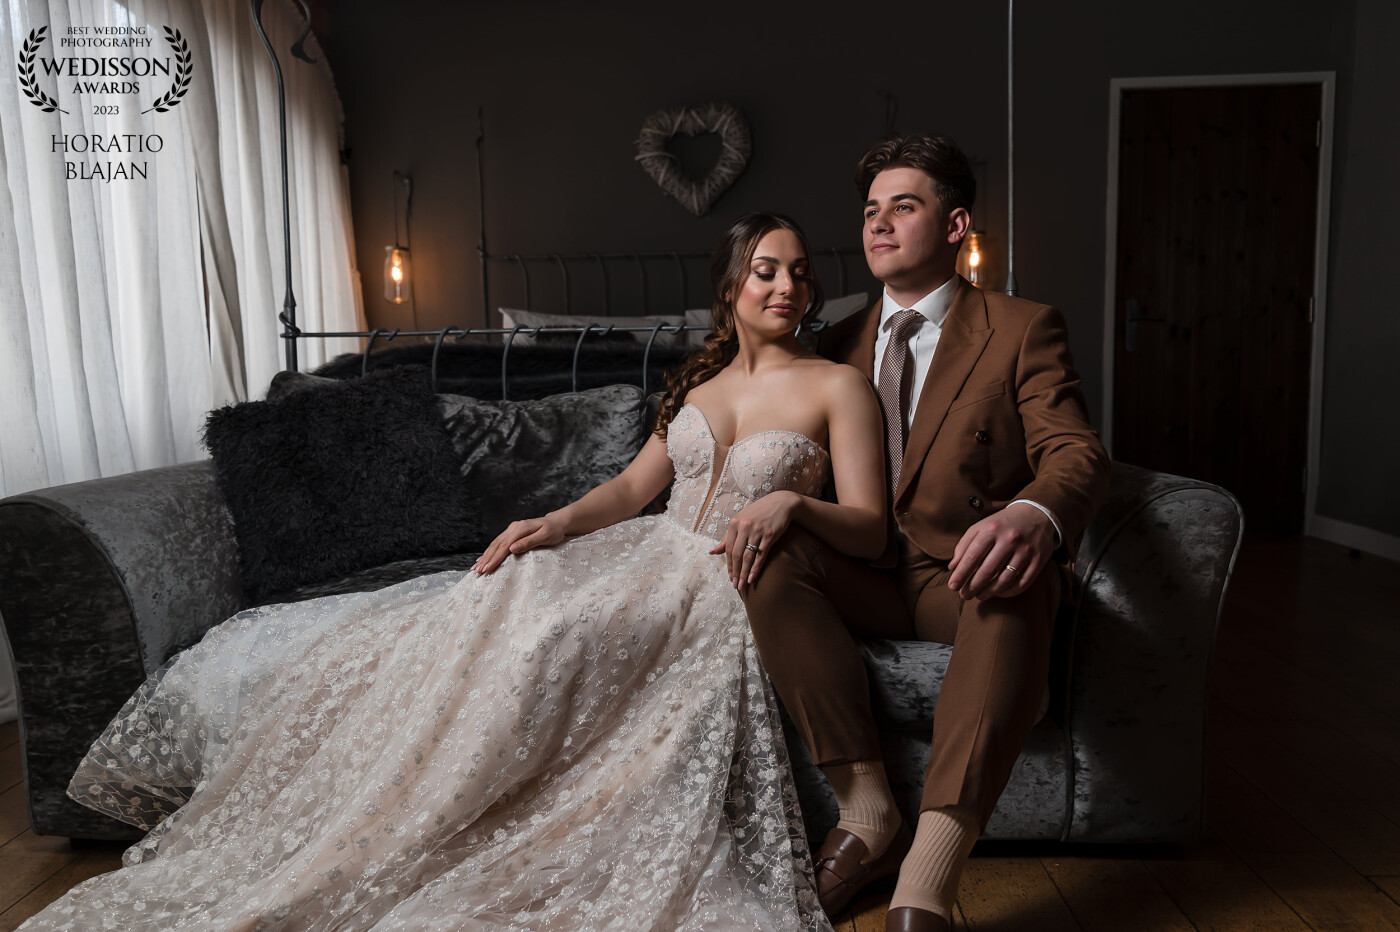 The love of Tamara and Christian is transcending the lens and the natural beauty of them two is something that I loved to capture as a wedding photographer.